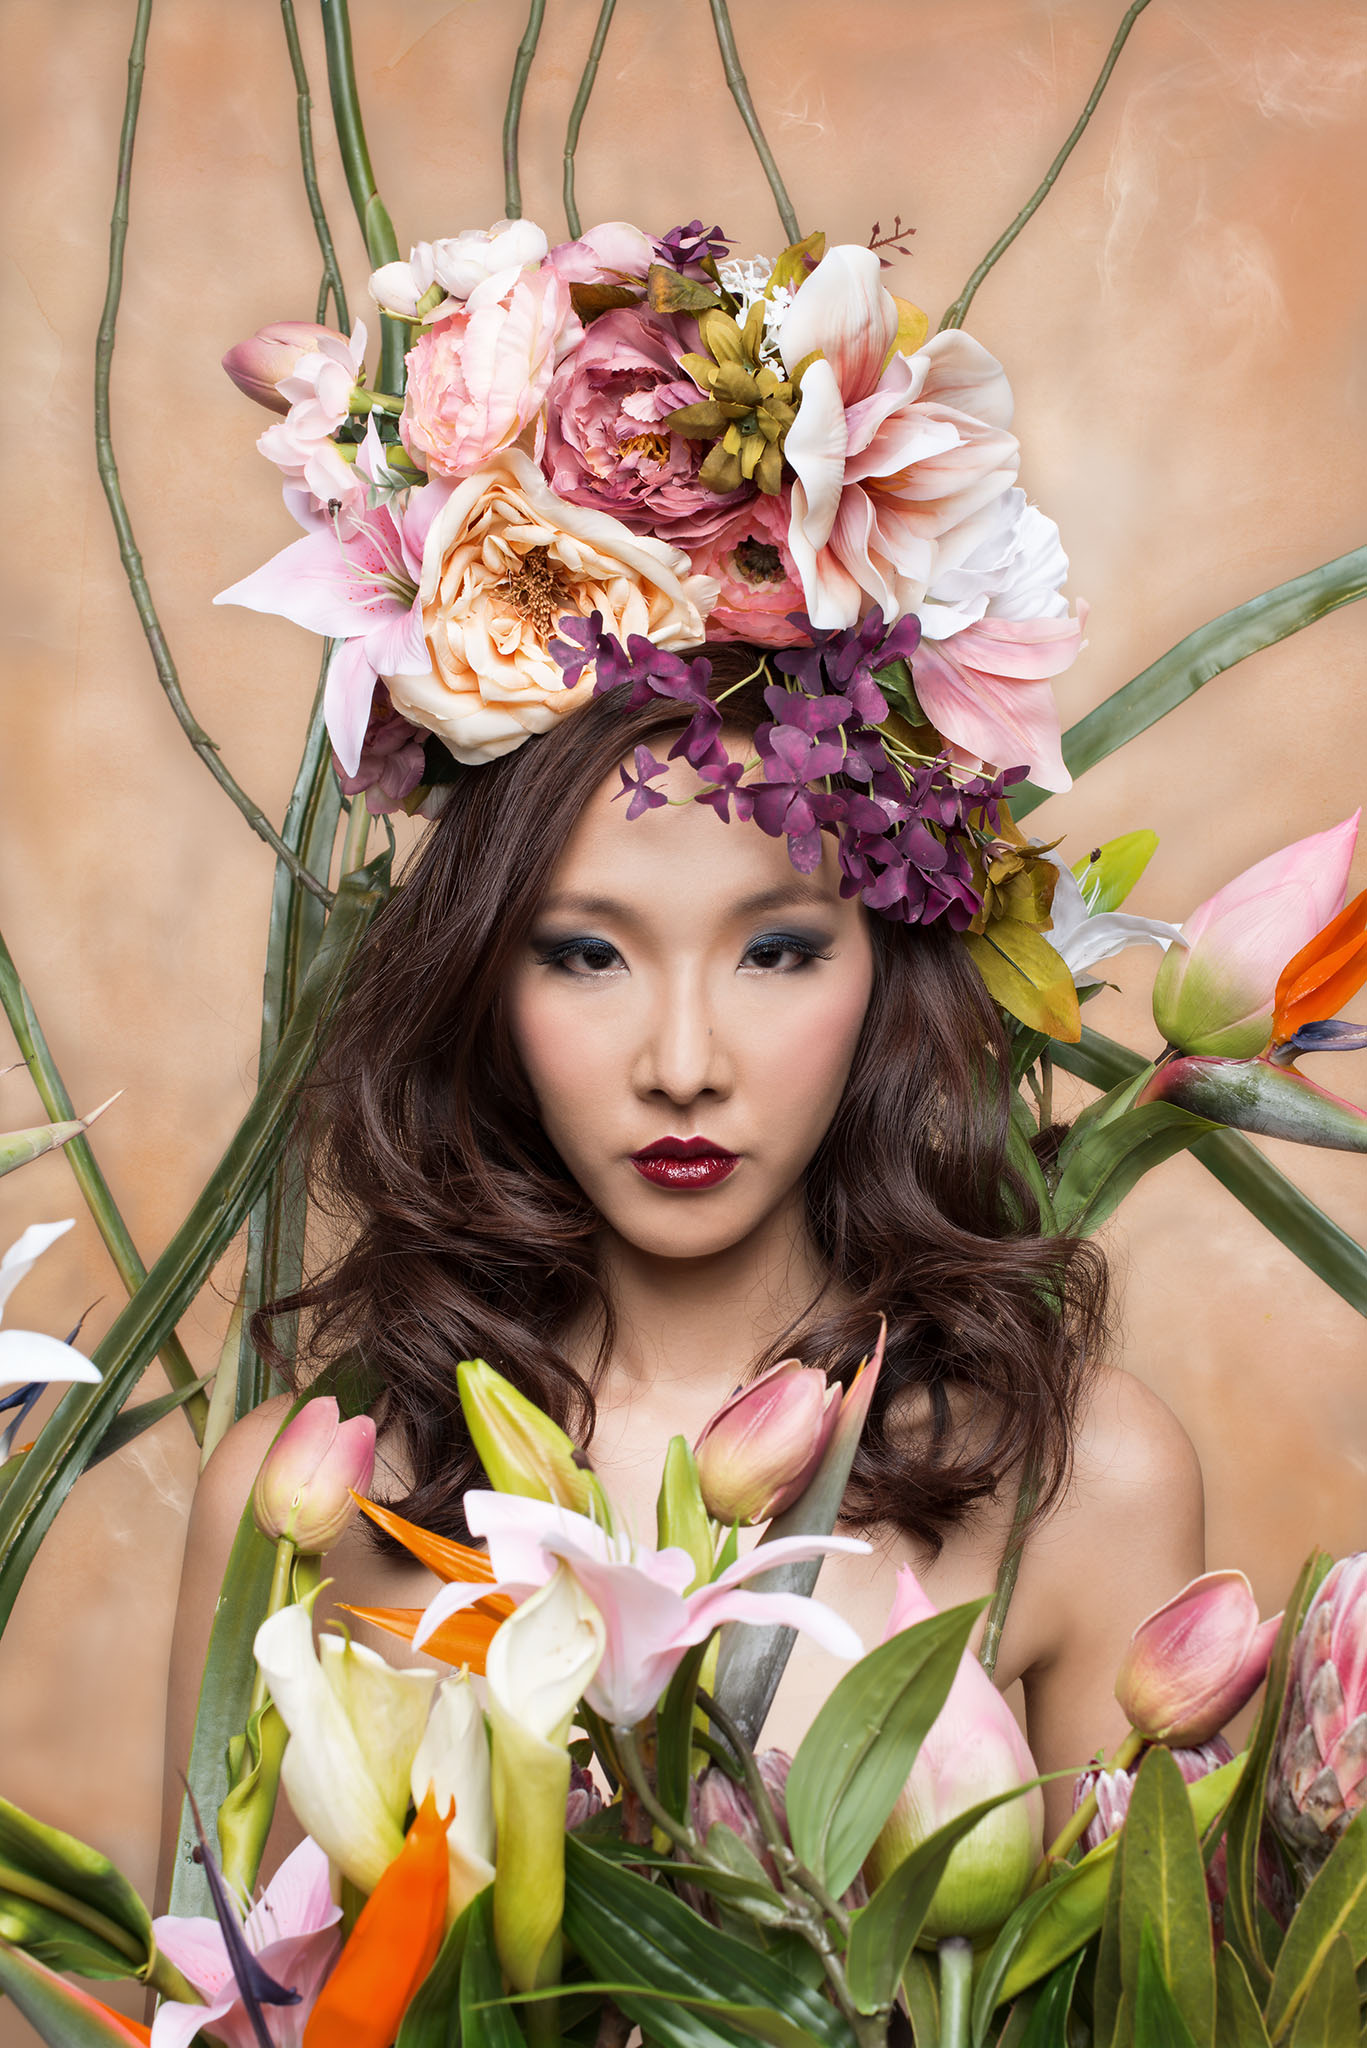 Learn Squared - Artistic Portrait Photography with Jingna Zhang